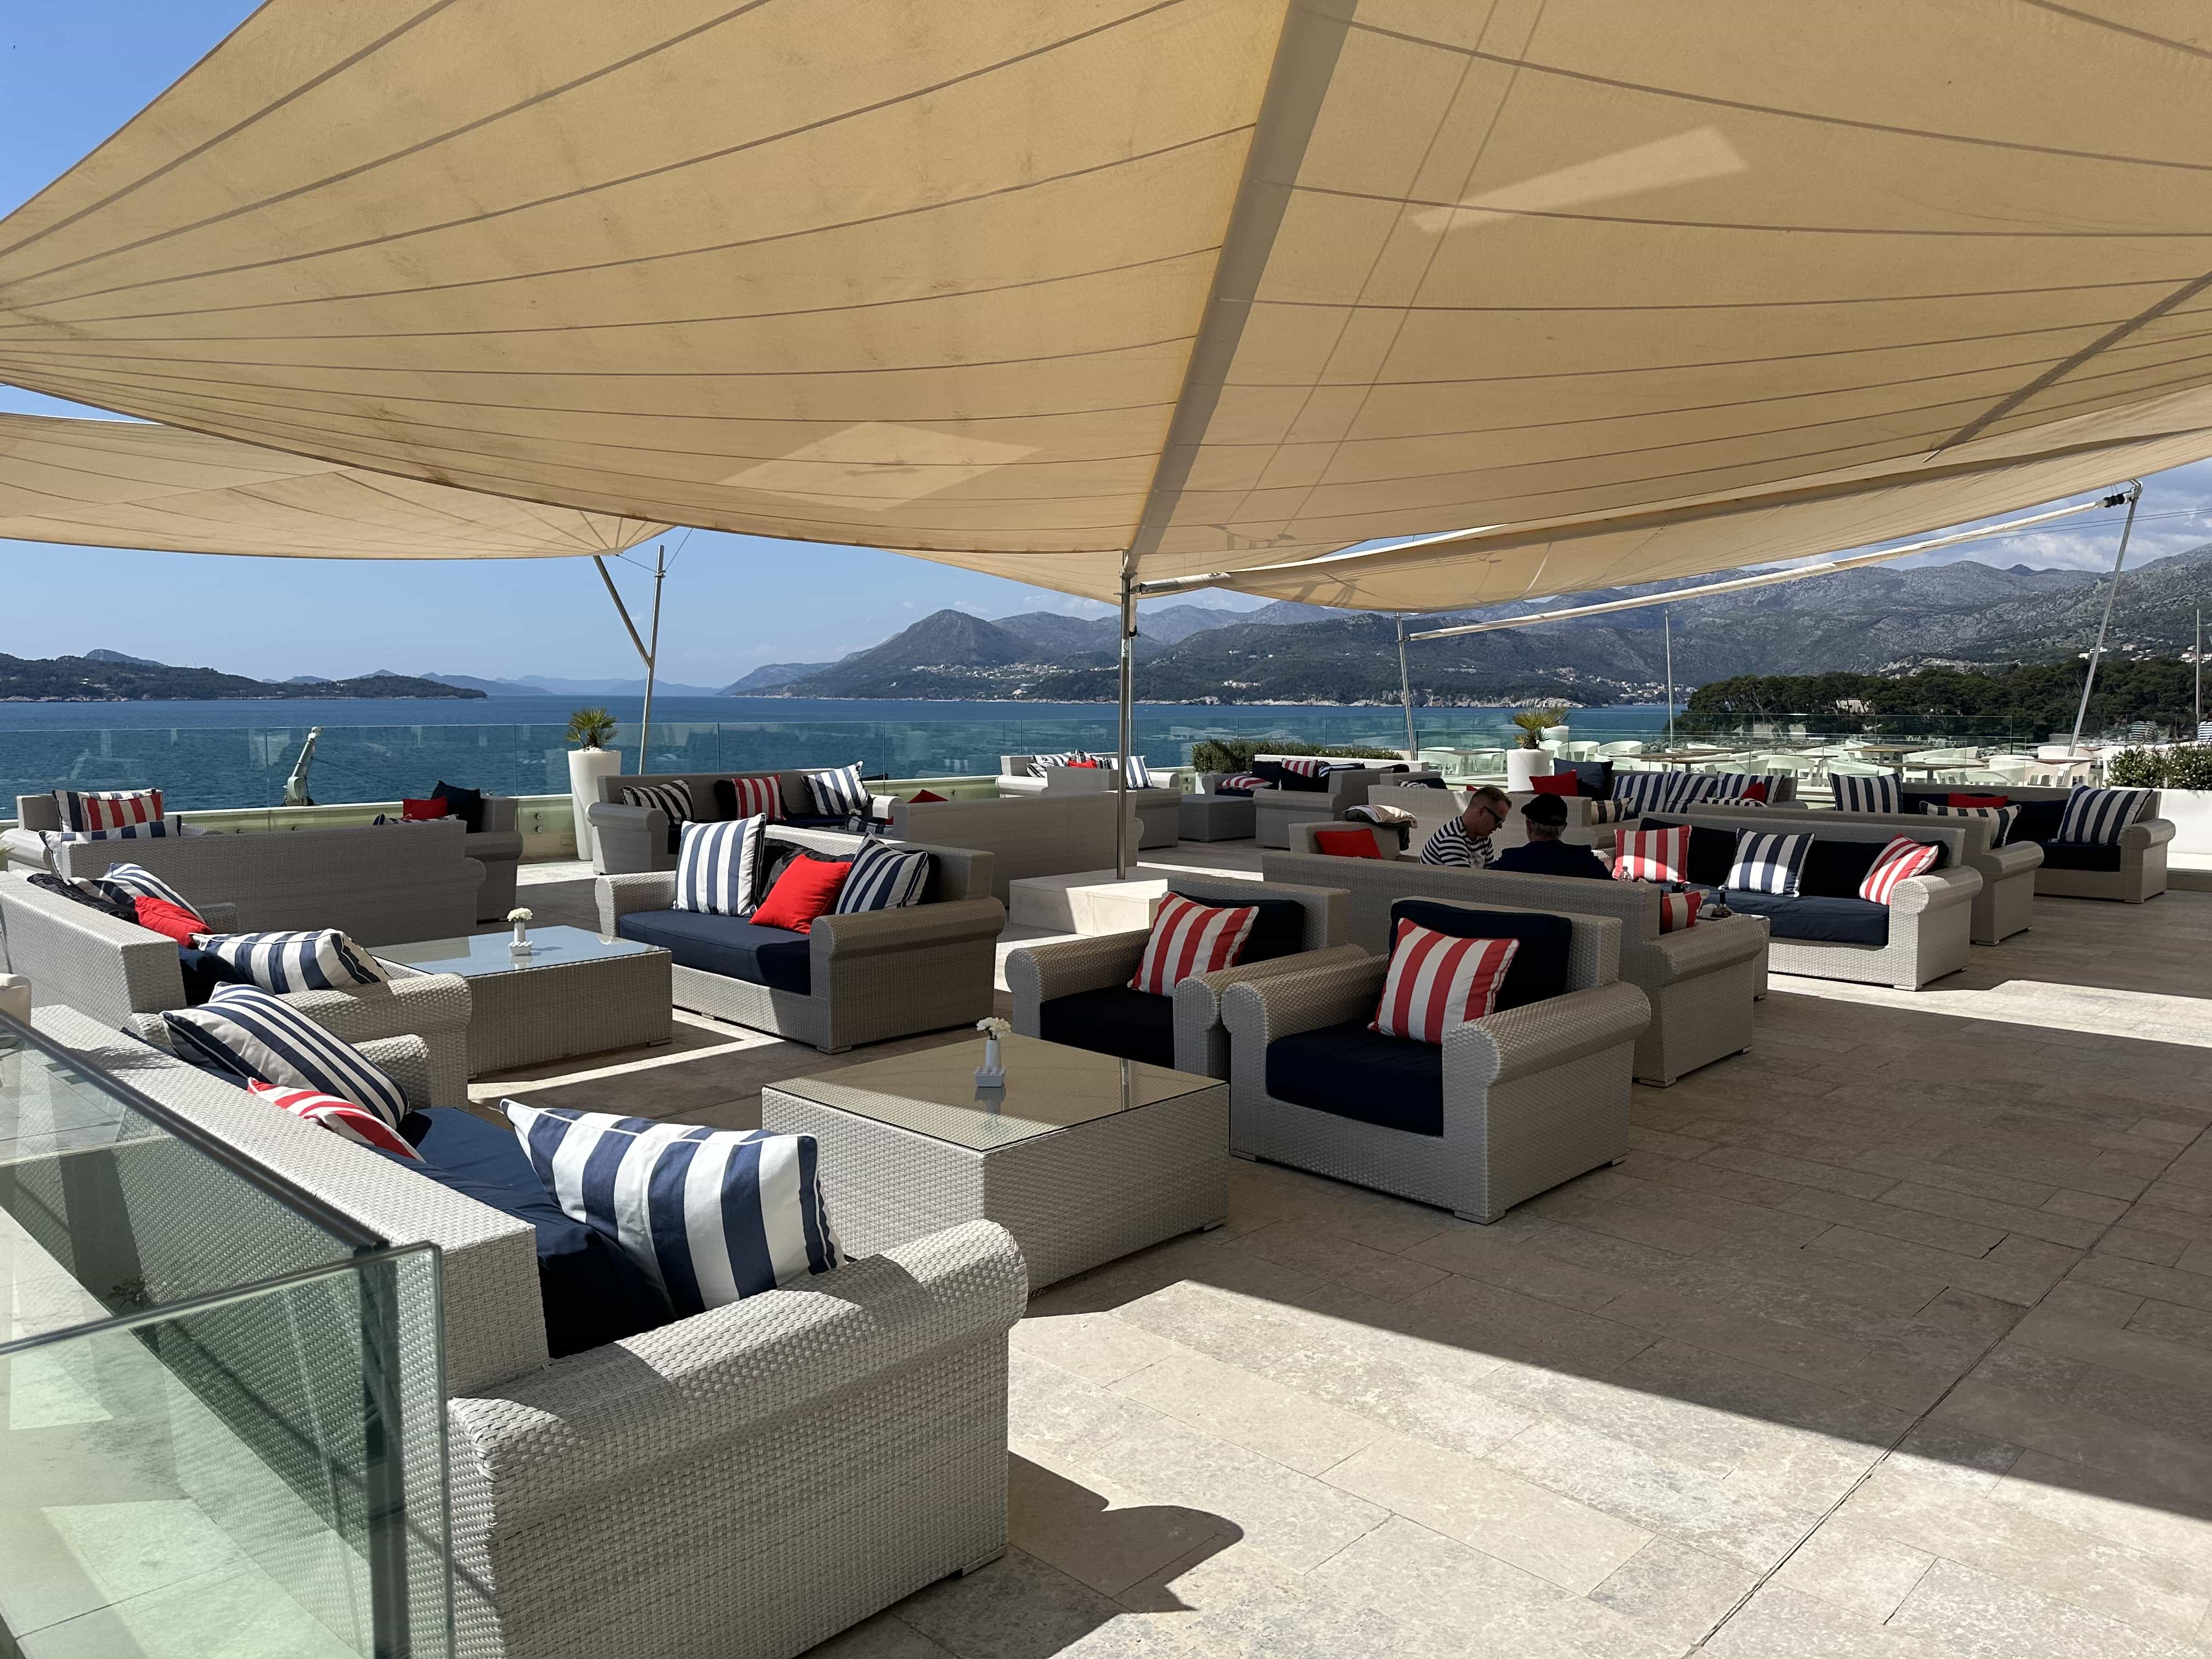 Casual lounge-style seating in a shaded outdoor bar area, with panoramic views over the sea